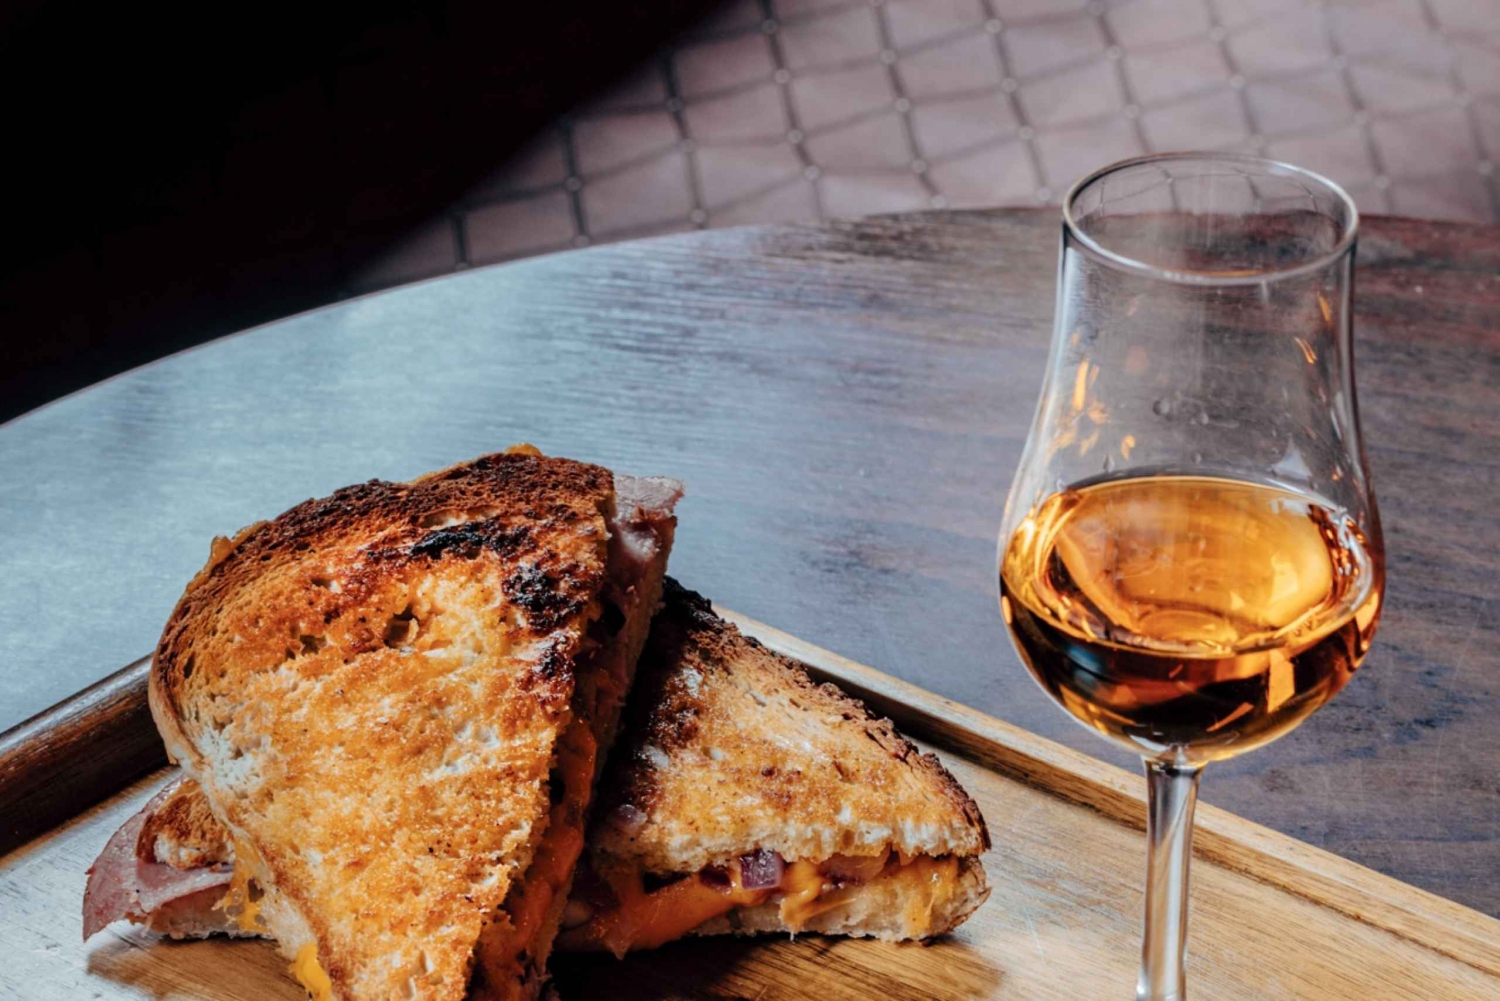 Dublin: Sip & Stroll Whiskey History Walking Tour with Lunch